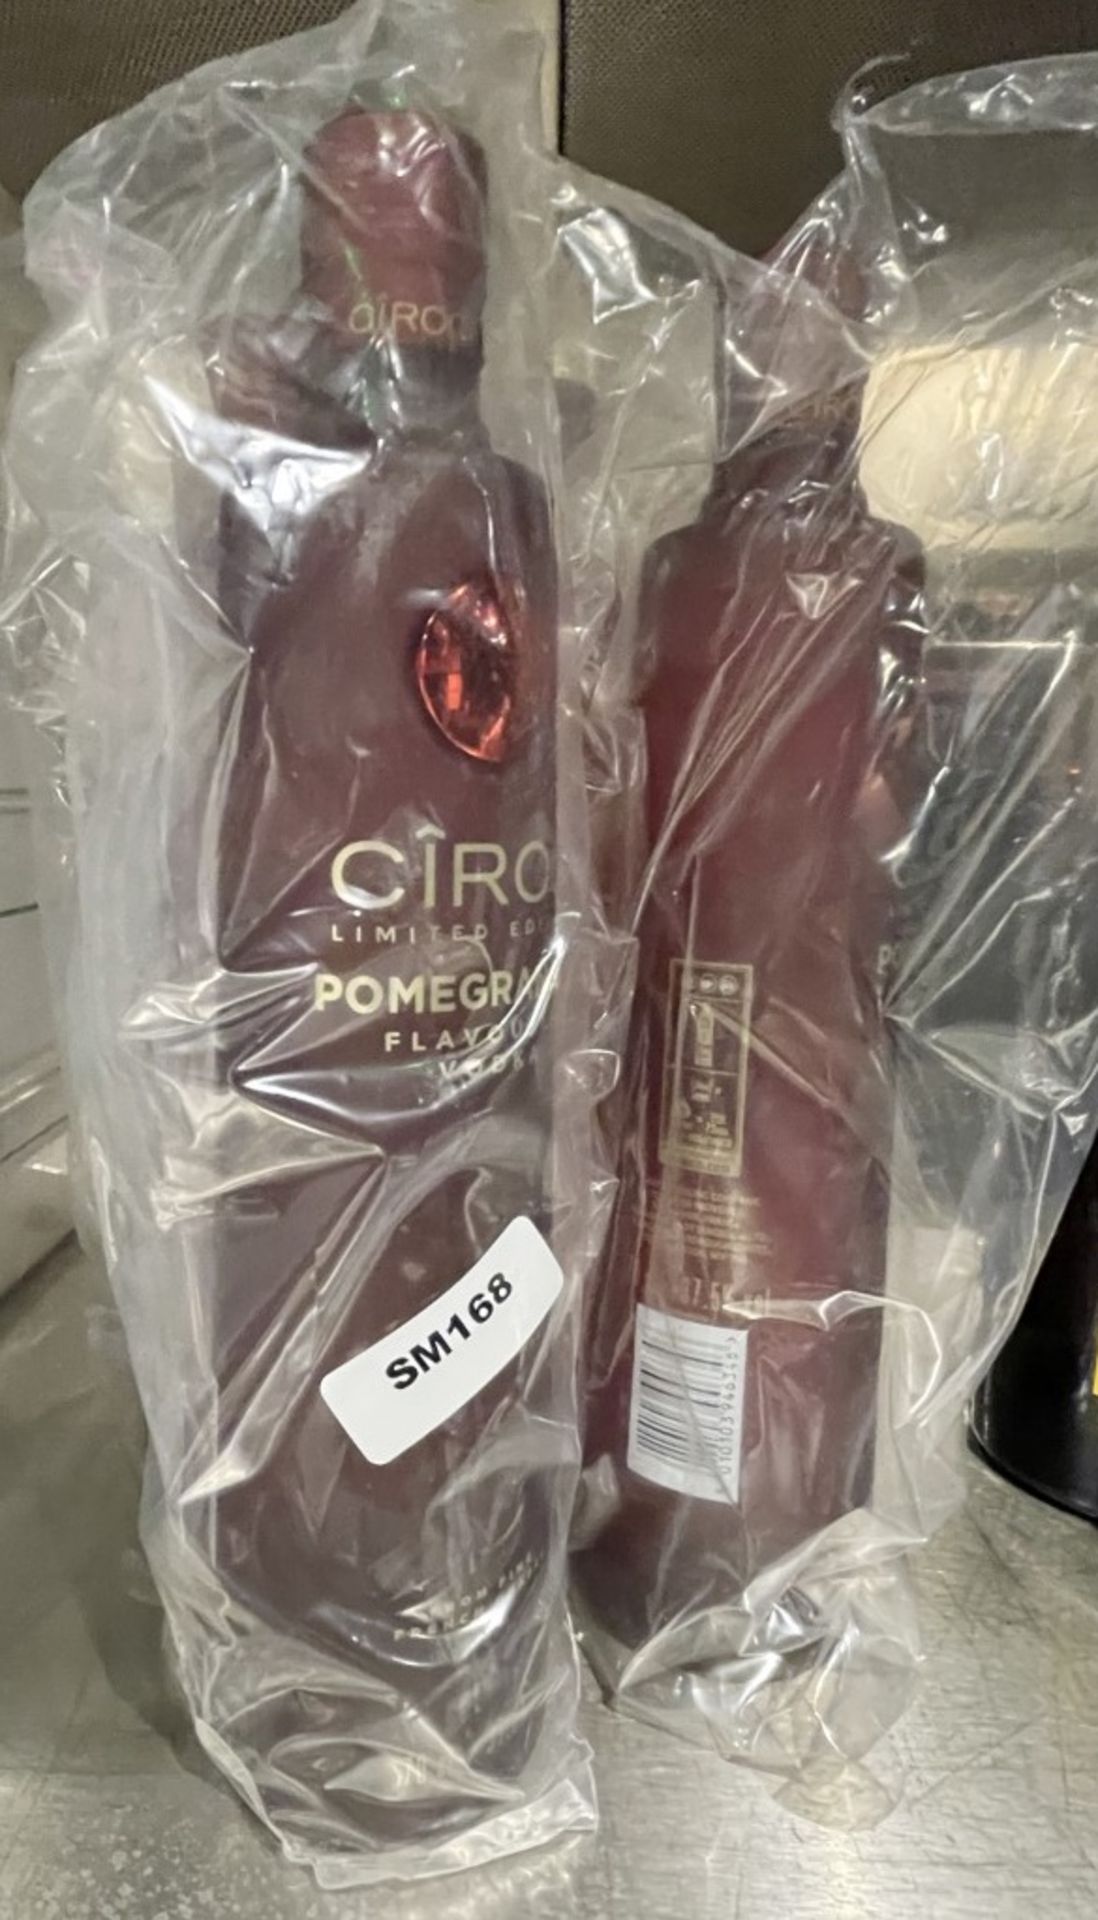 4 x Limited Edition 70cl Bottles of Ciroc Pomegranate Flavoured 37.5% Vodka - New Unopened Bottles - Image 2 of 6